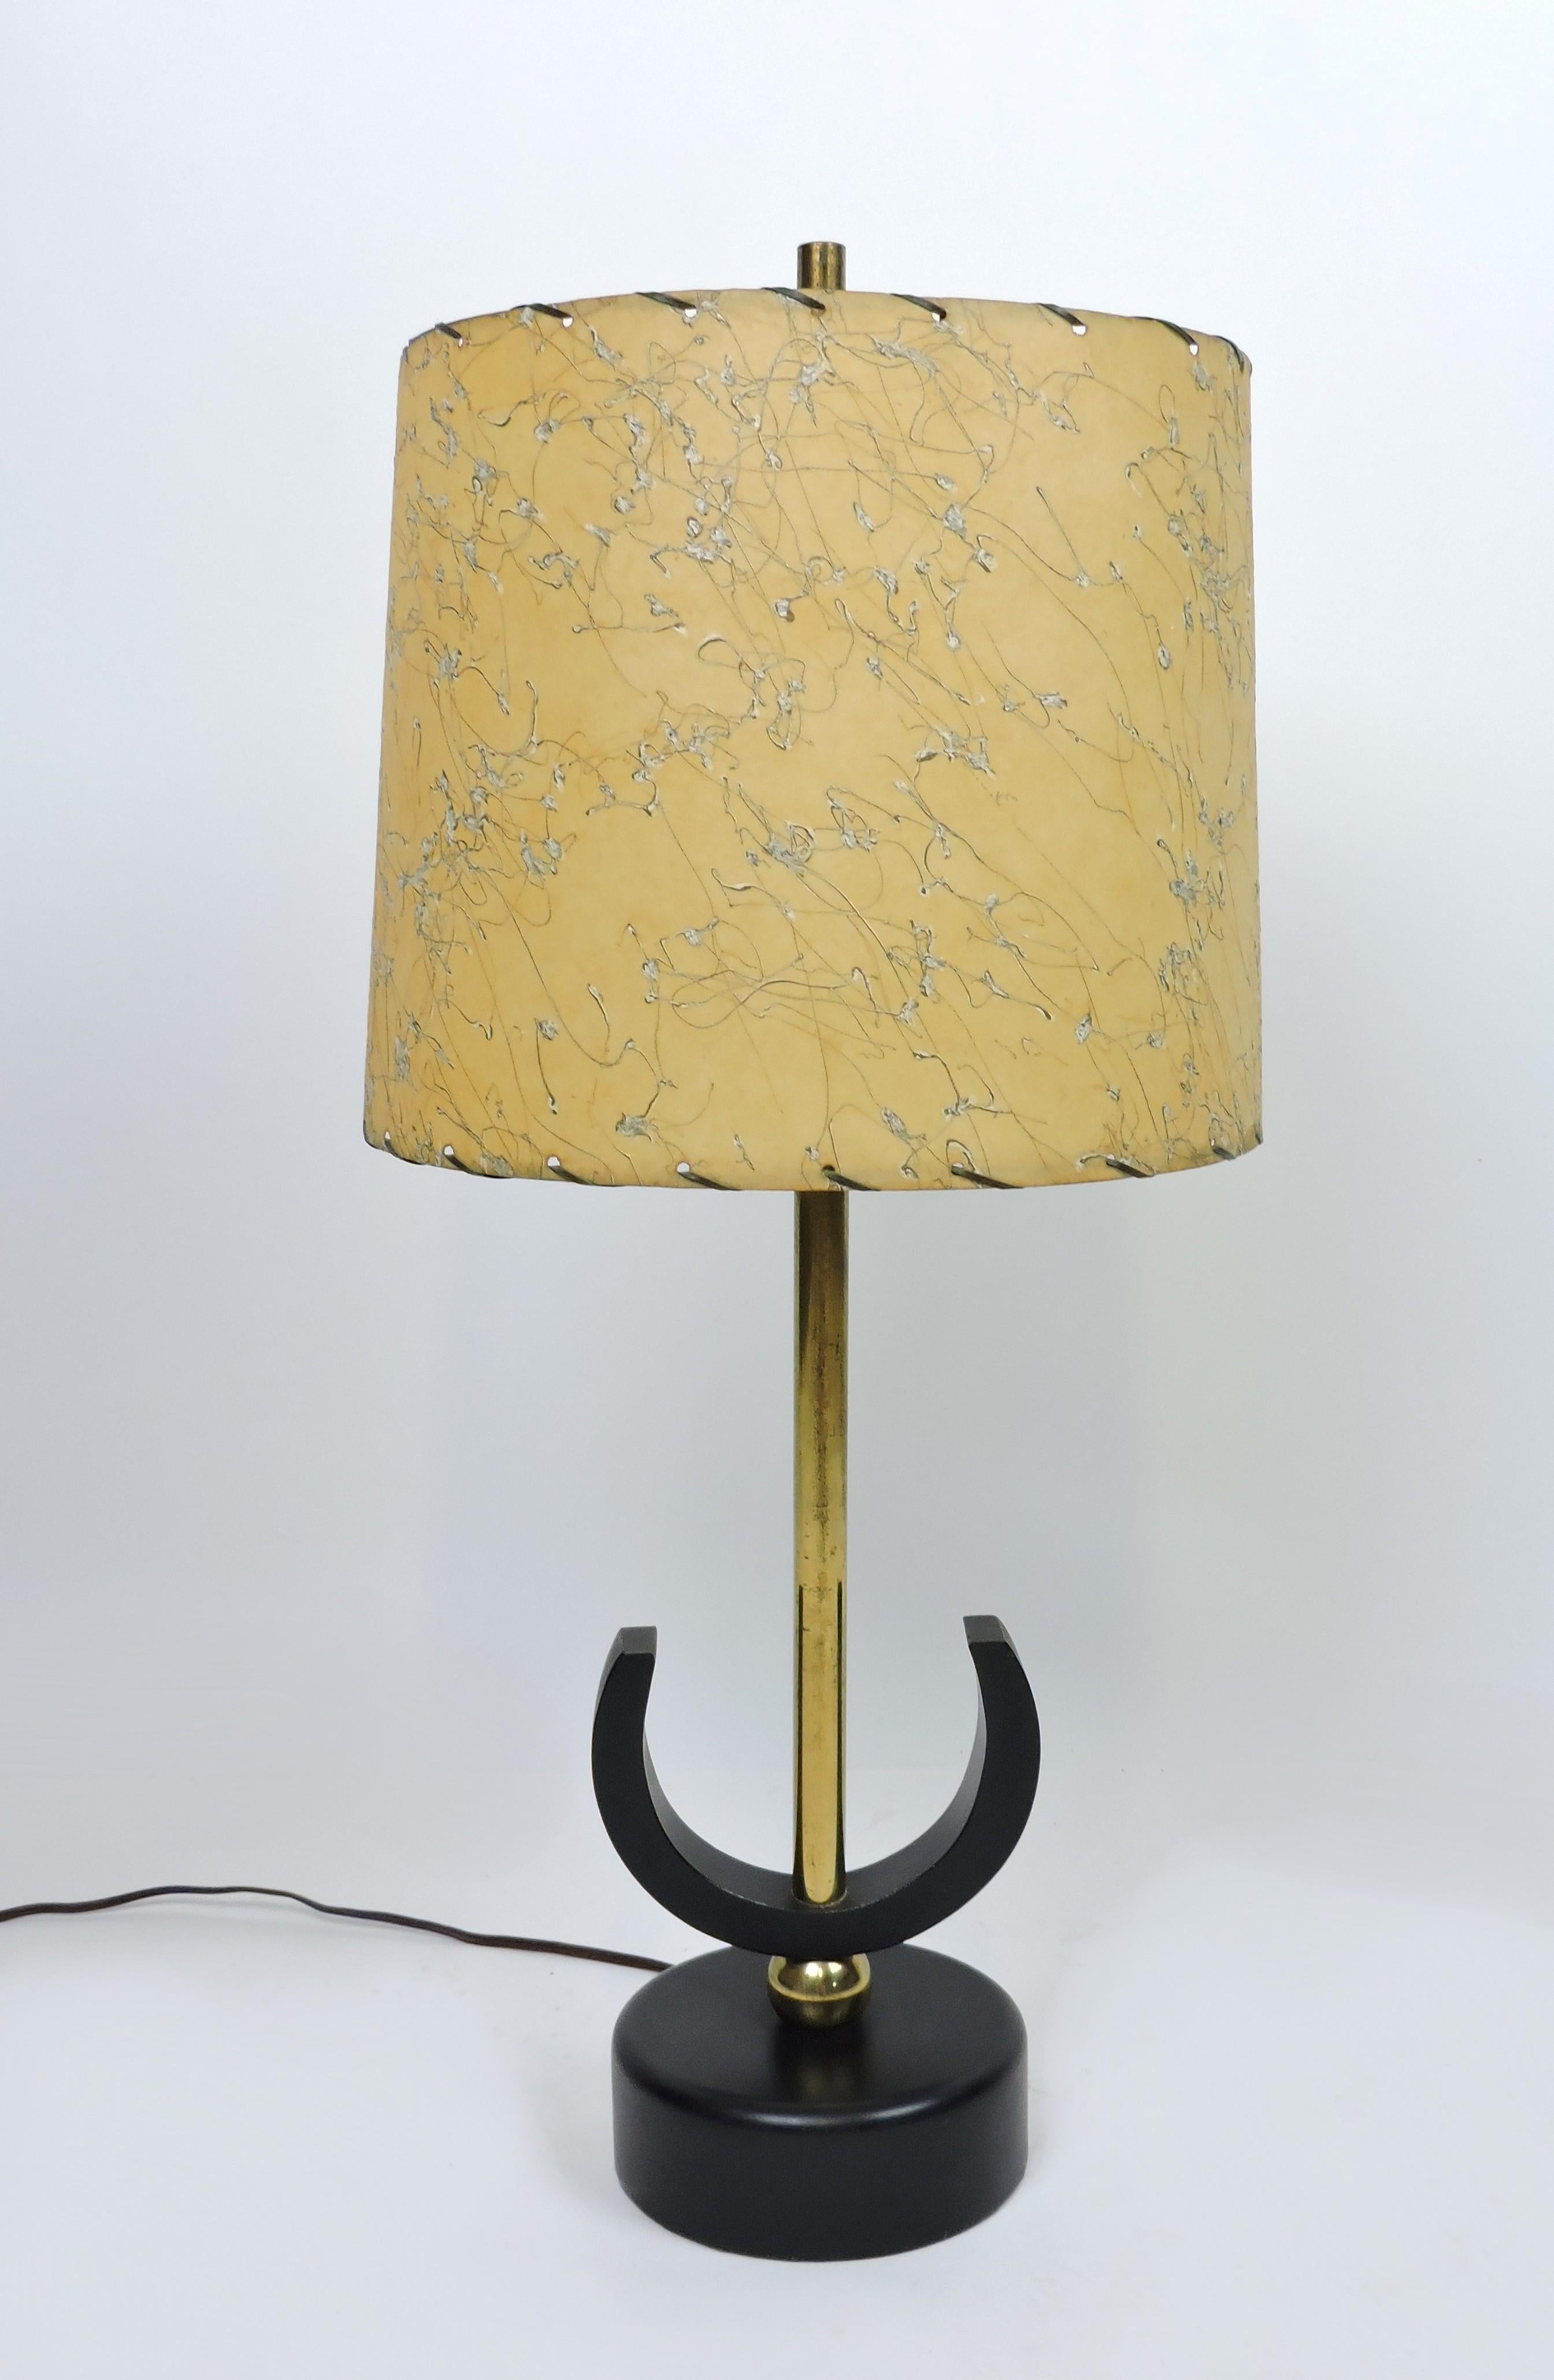 Weinberg Style Mid Century Modernist Geometric Abstract Table Lamp For Sale 2